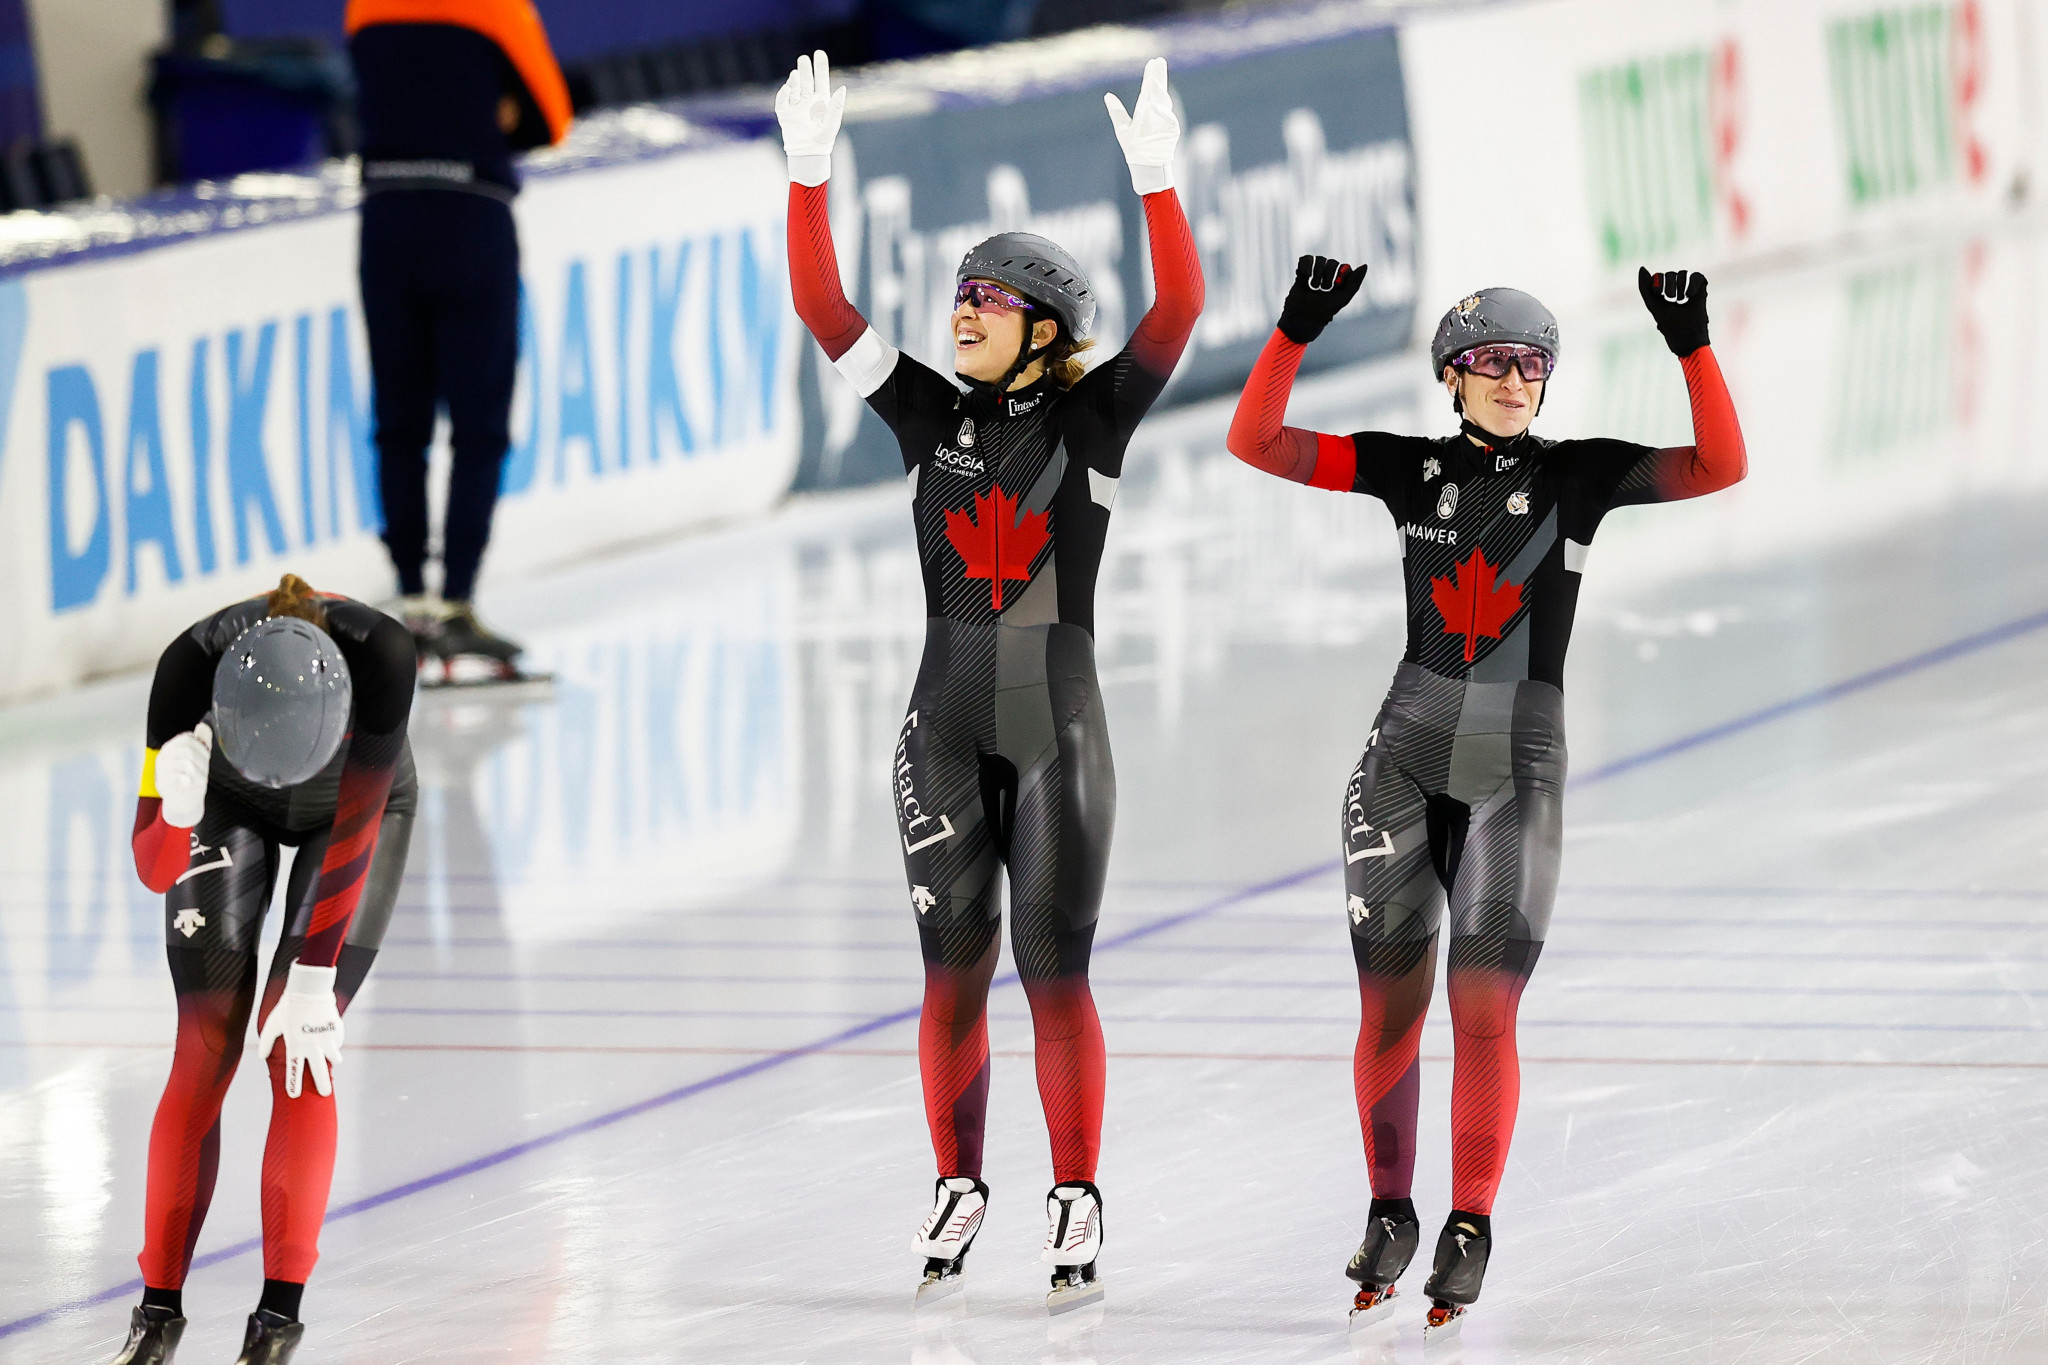 Canada women set team pursuit track record at Heerenveen Speed Skating World Cup 